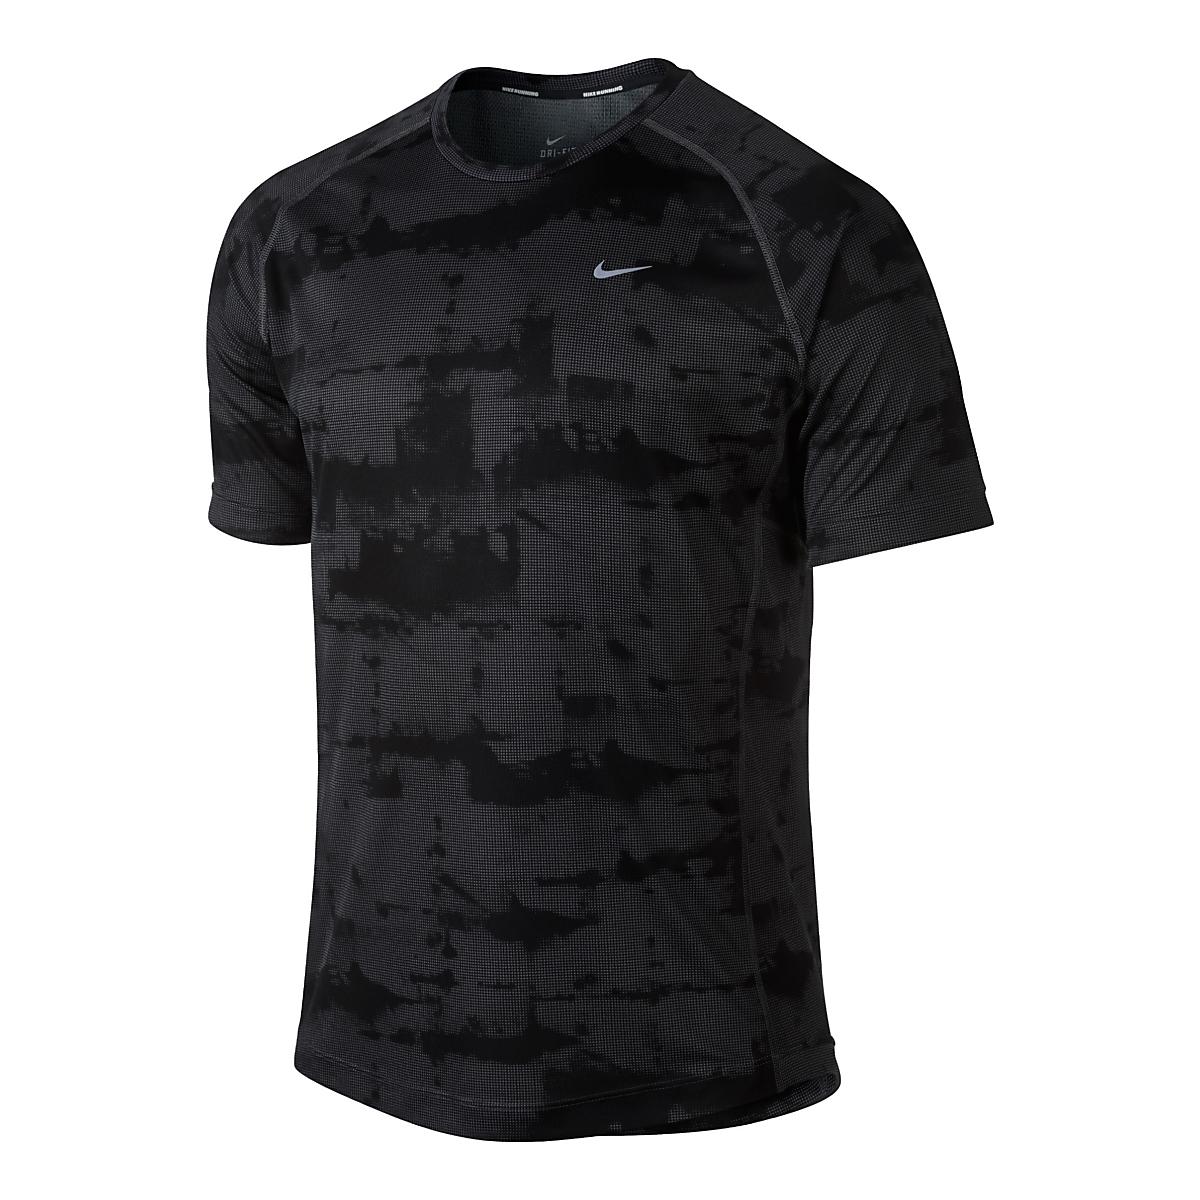 Mens Nike Miler Graphic Short Sleeve Technical Tops at Road Runner Sports